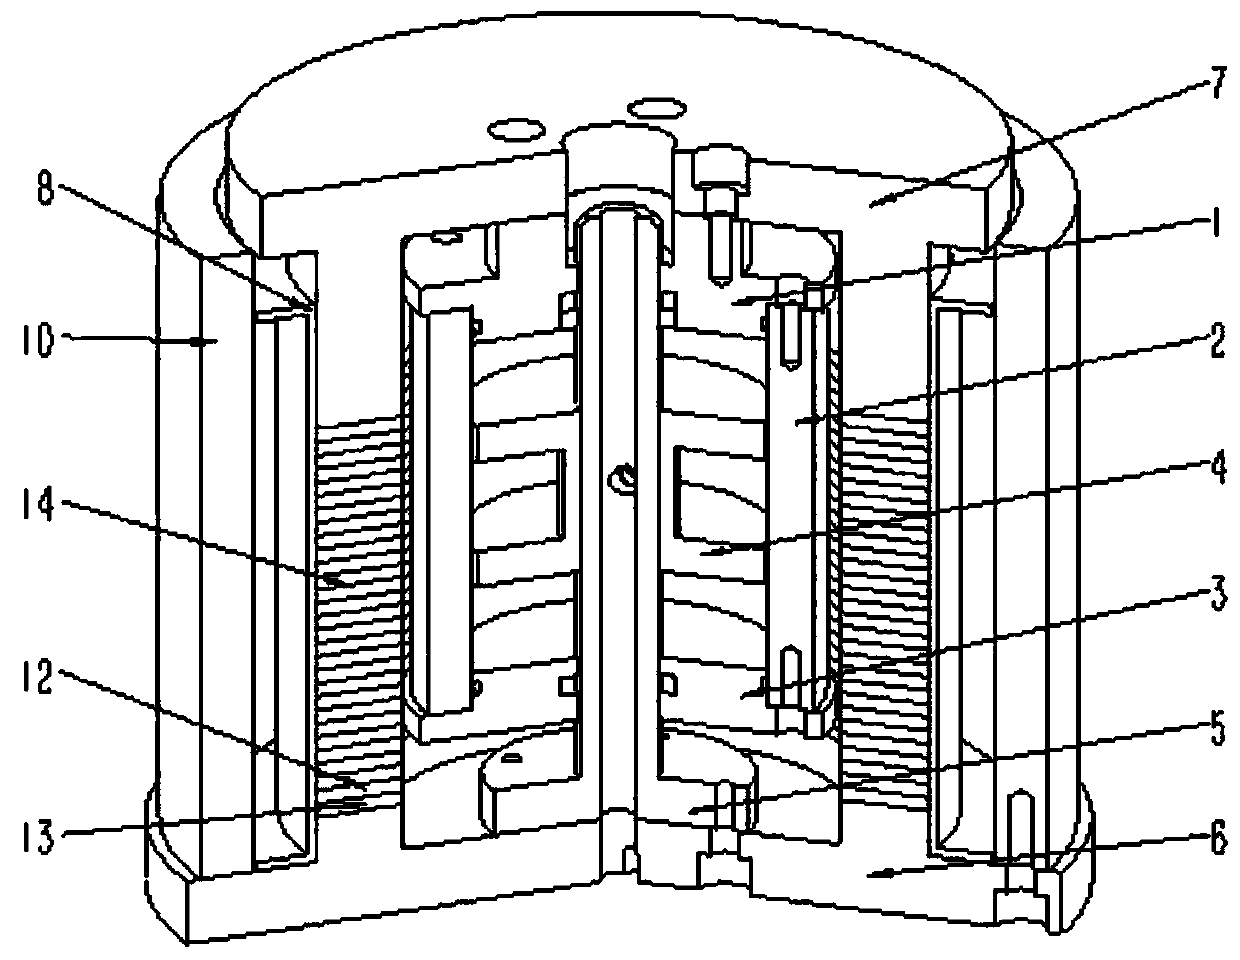 A variable stiffness vibration isolator for vibration isolation of electronic equipment